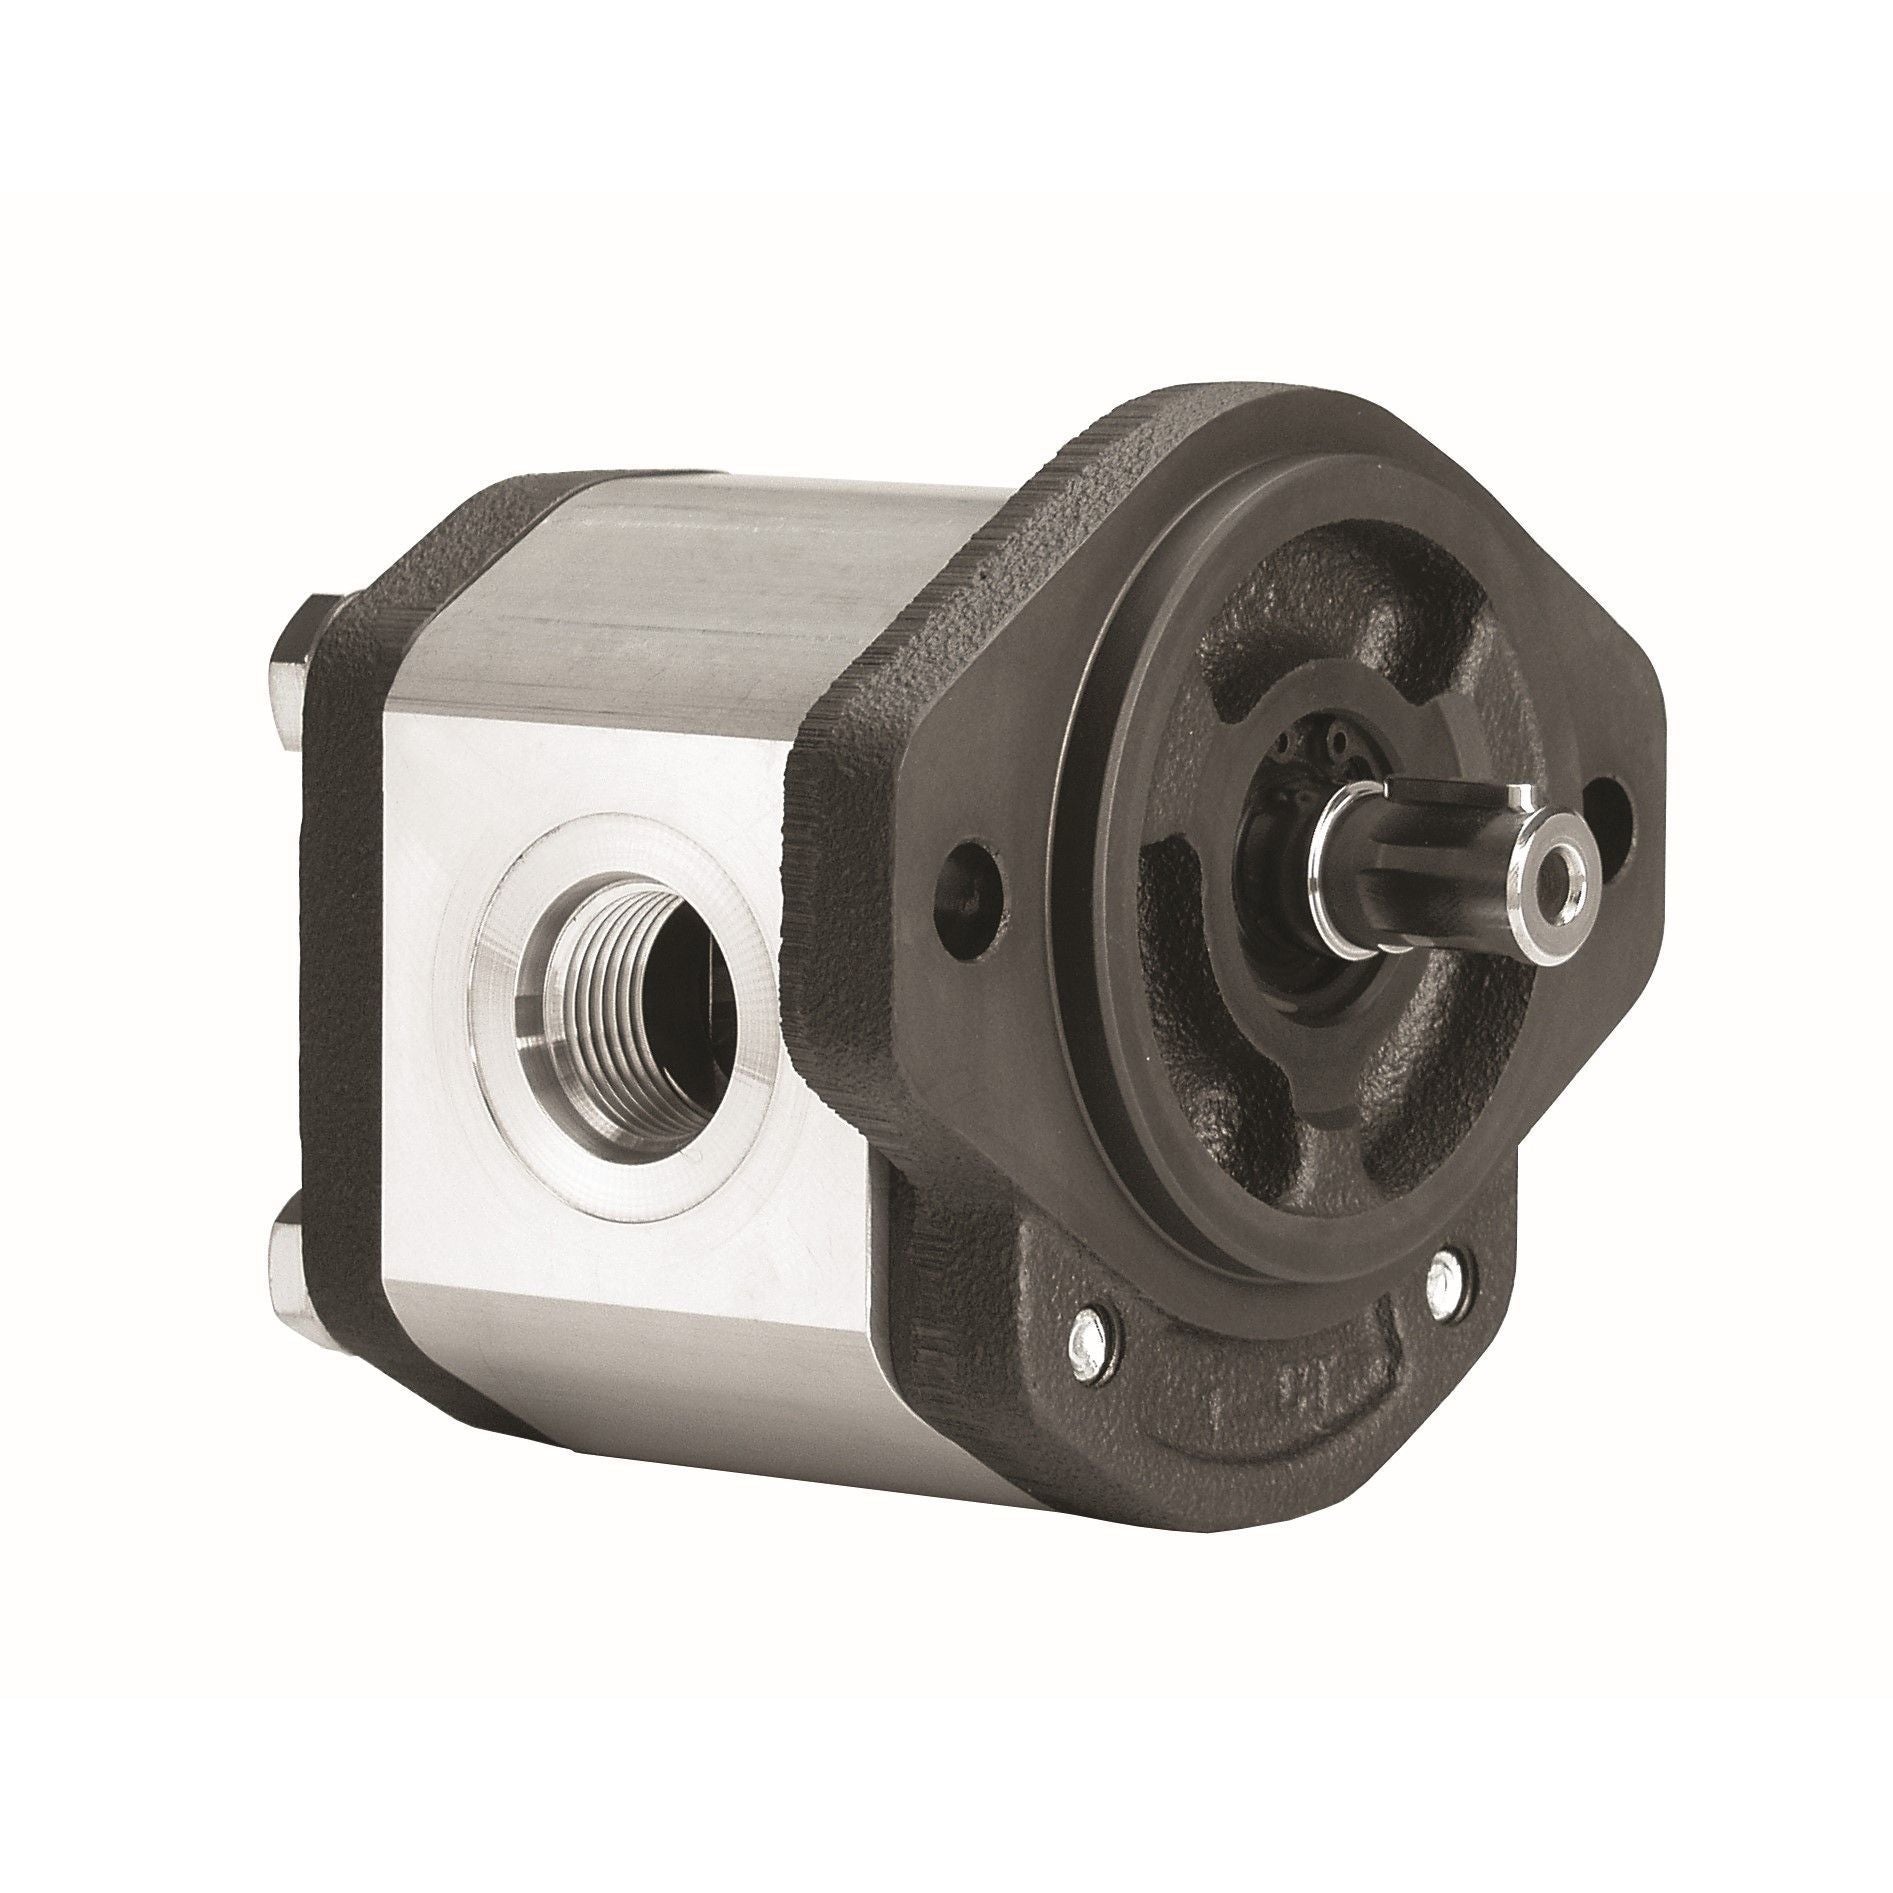 GHP1A-D-7 : Marzocchi Gear Pump, CW, 5.2cc (0.3172in3), 2.47 GPM, 3770psi, 3500 RPM, #8 SAE (1/2") In, #6 SAE (3/8") Out, Keyed Shaft 1/2" Bore x 1/8" Key, SAE AA 2-Bolt Mount